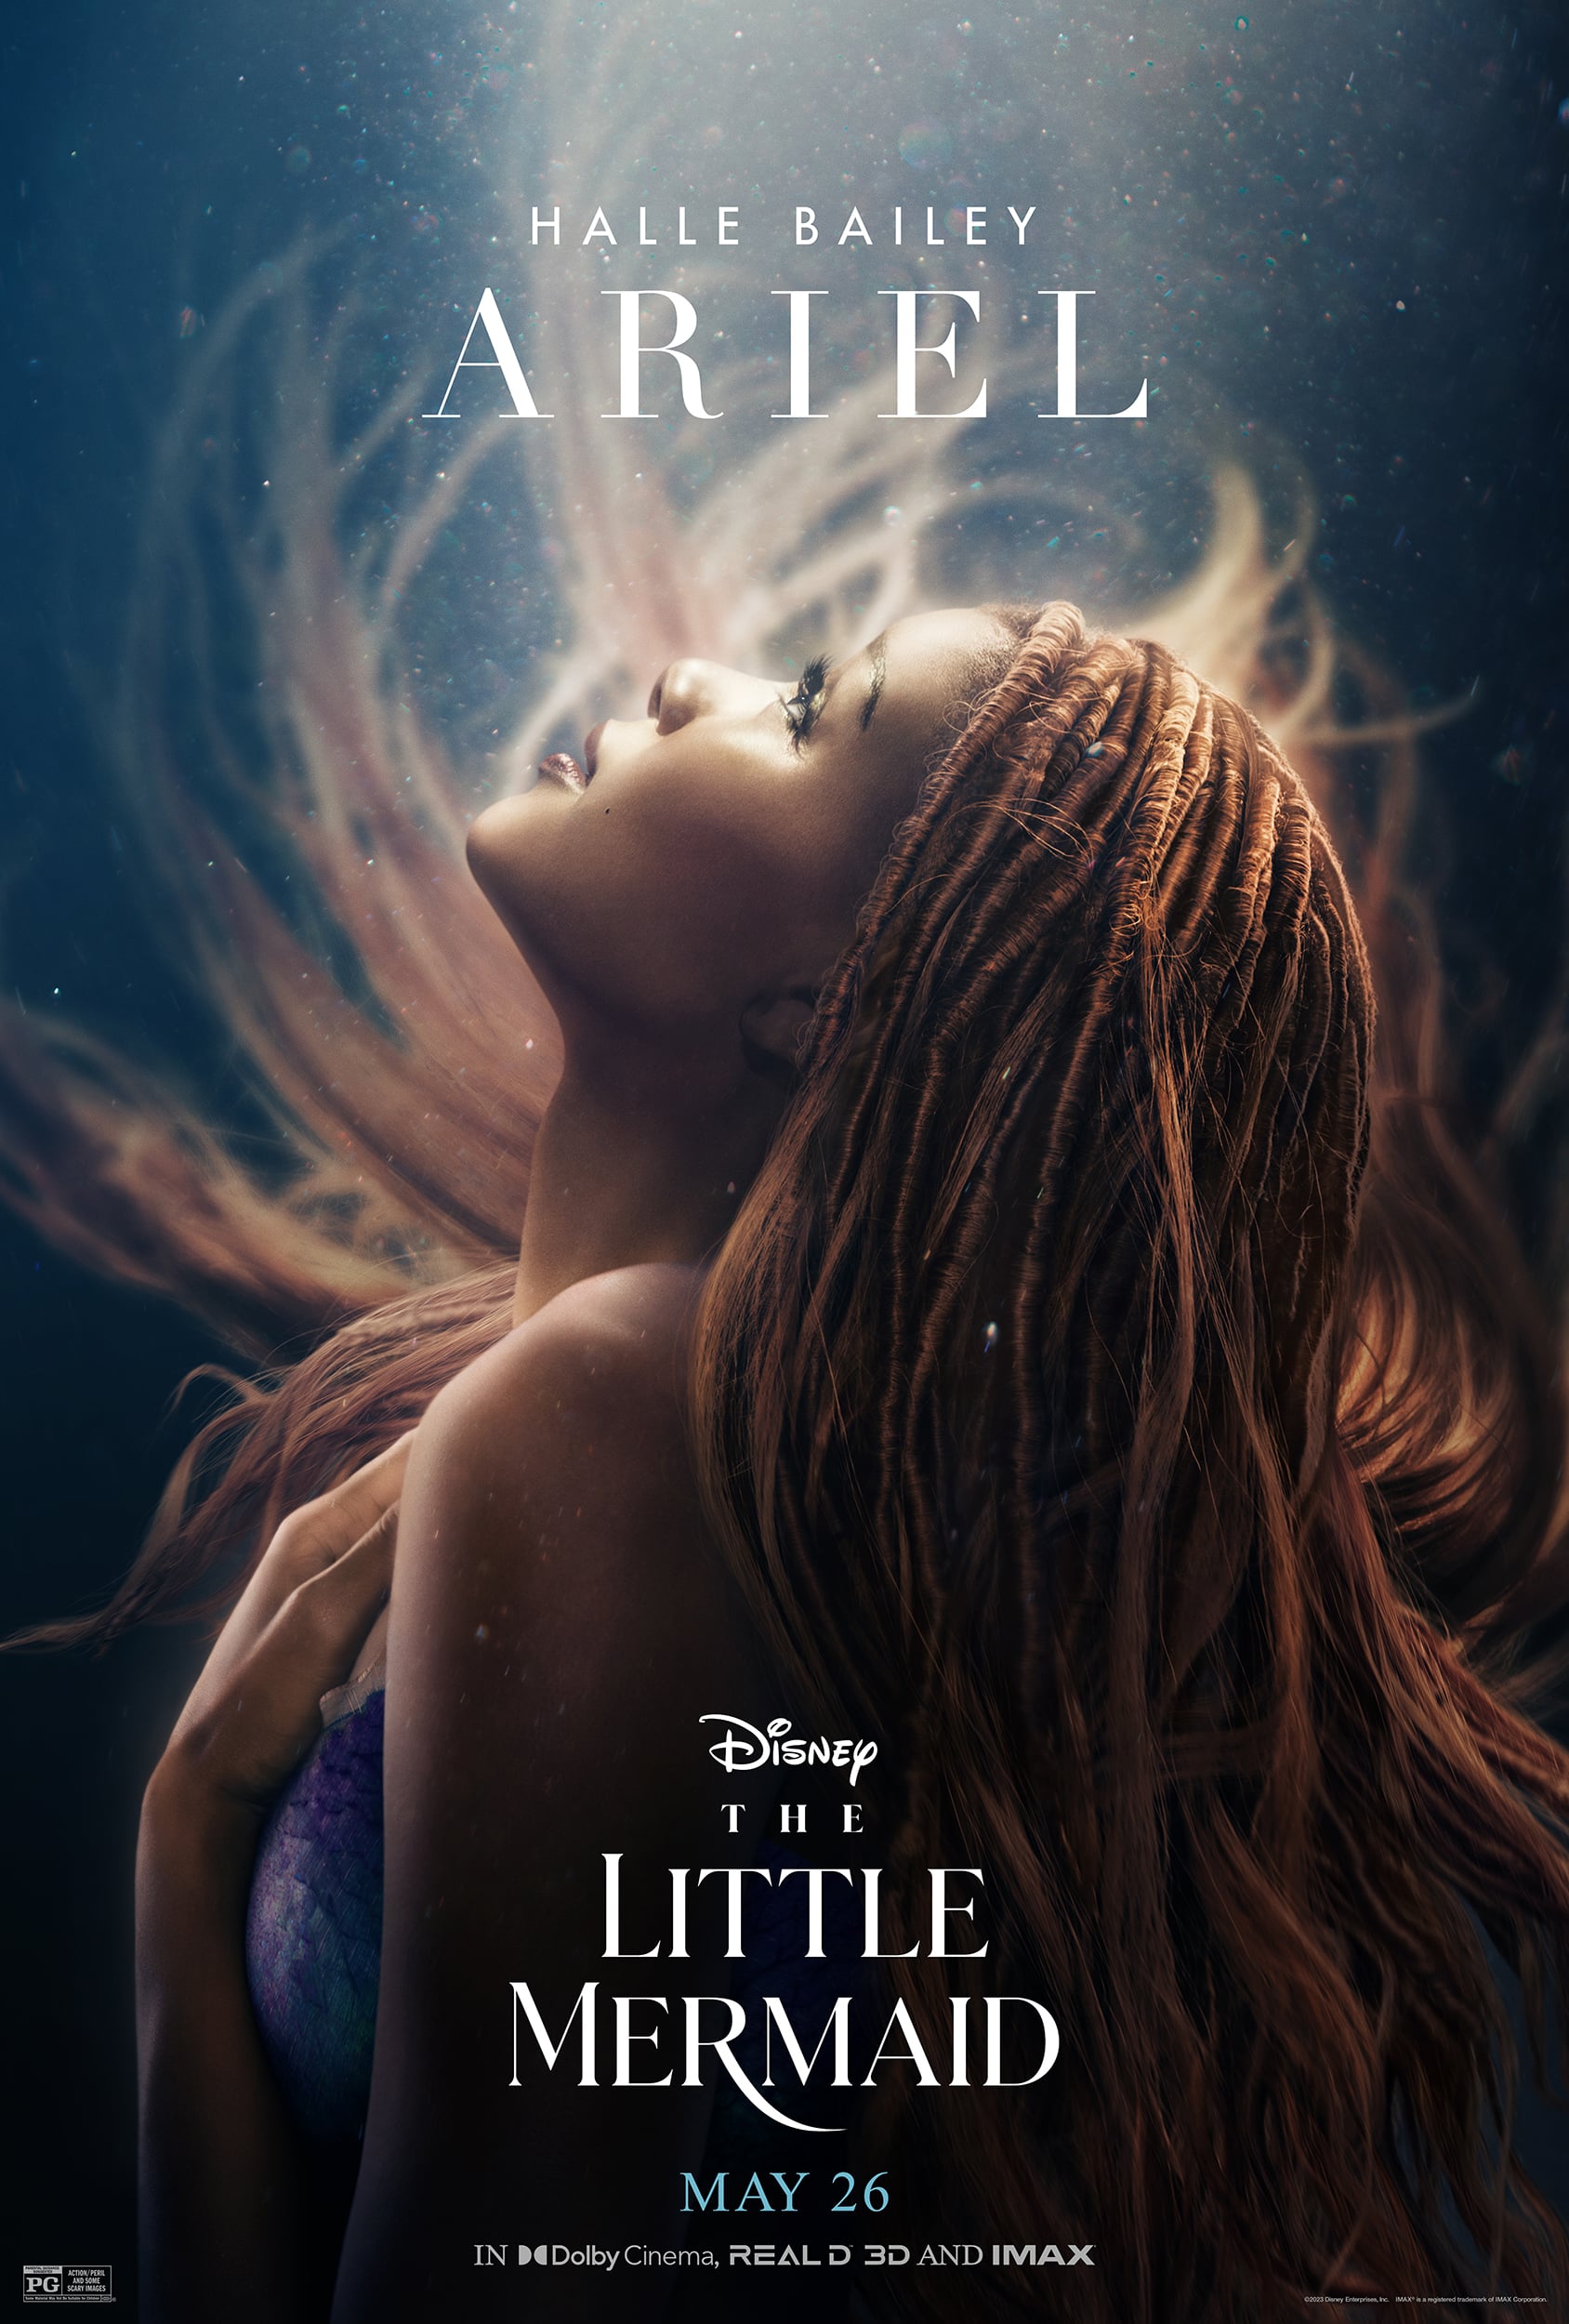 Disney The Little Mermaid Live Action movie 2023: story, cast